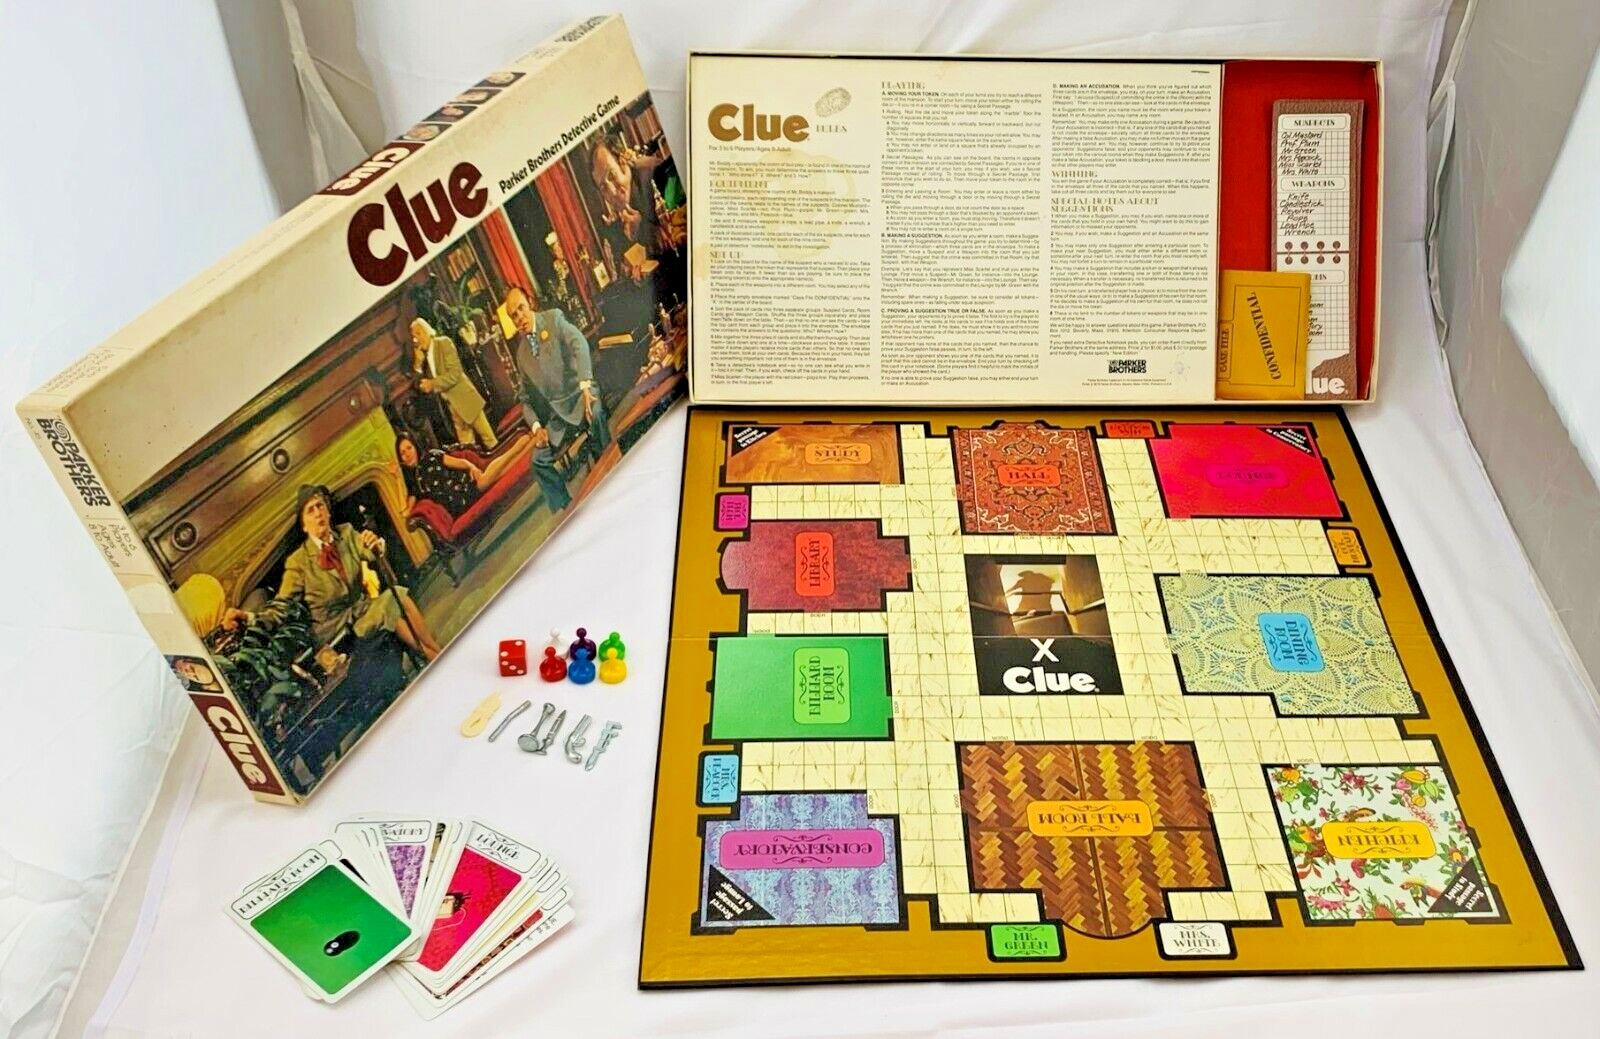 1972 Clue Game by Parker Brothers Complete in Very Good Condition 